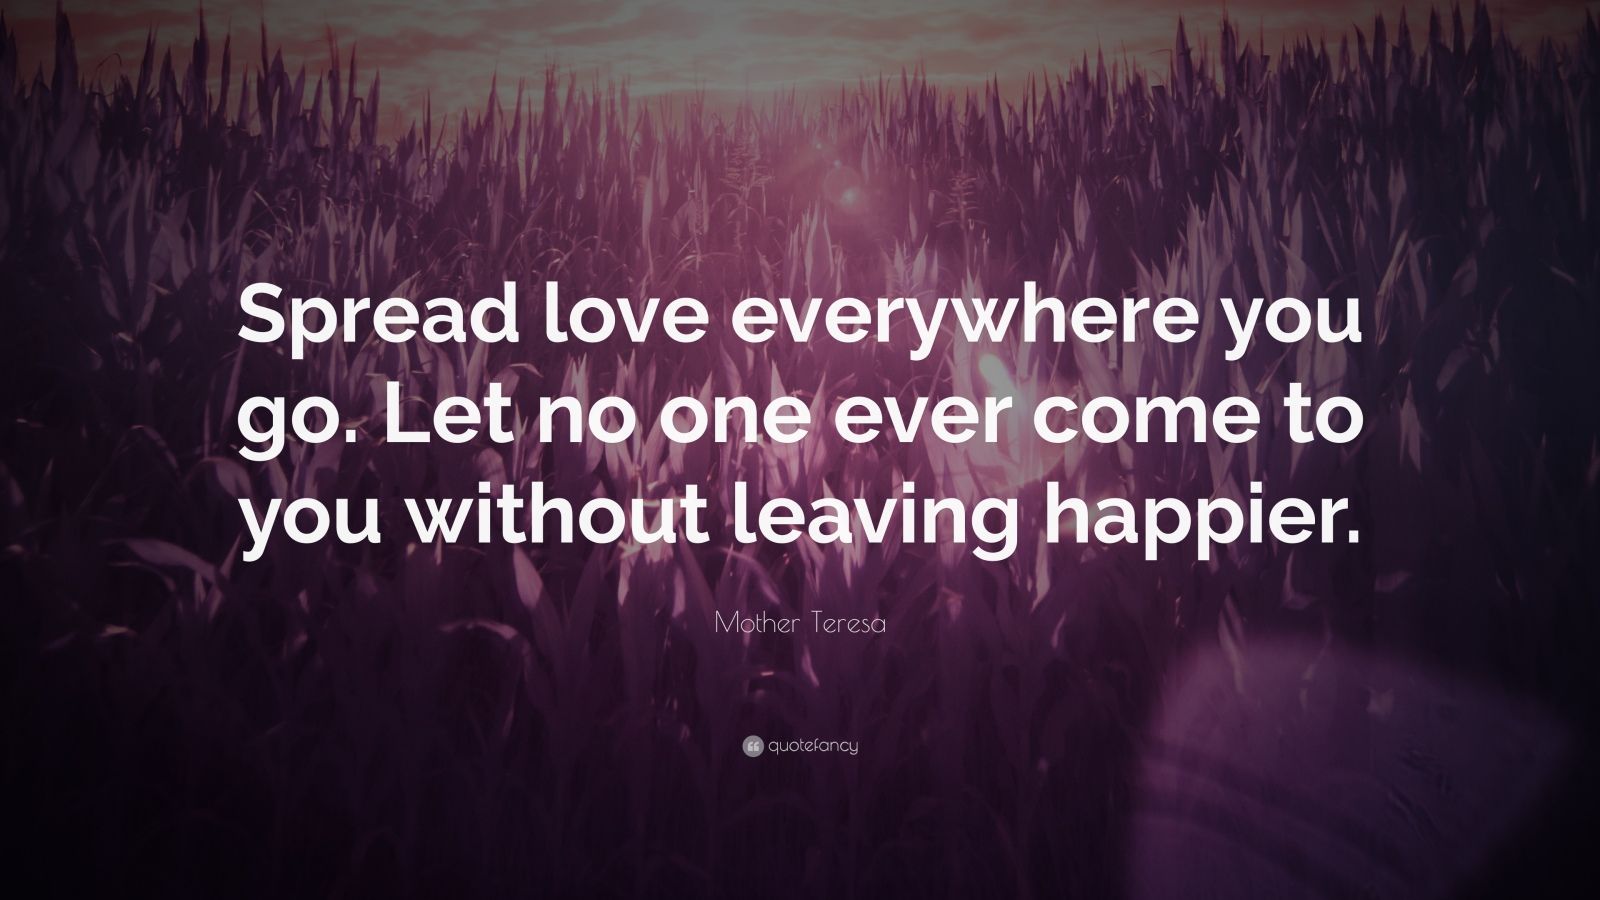 Mother Teresa Quote: “Spread love everywhere you go. Let no one ever